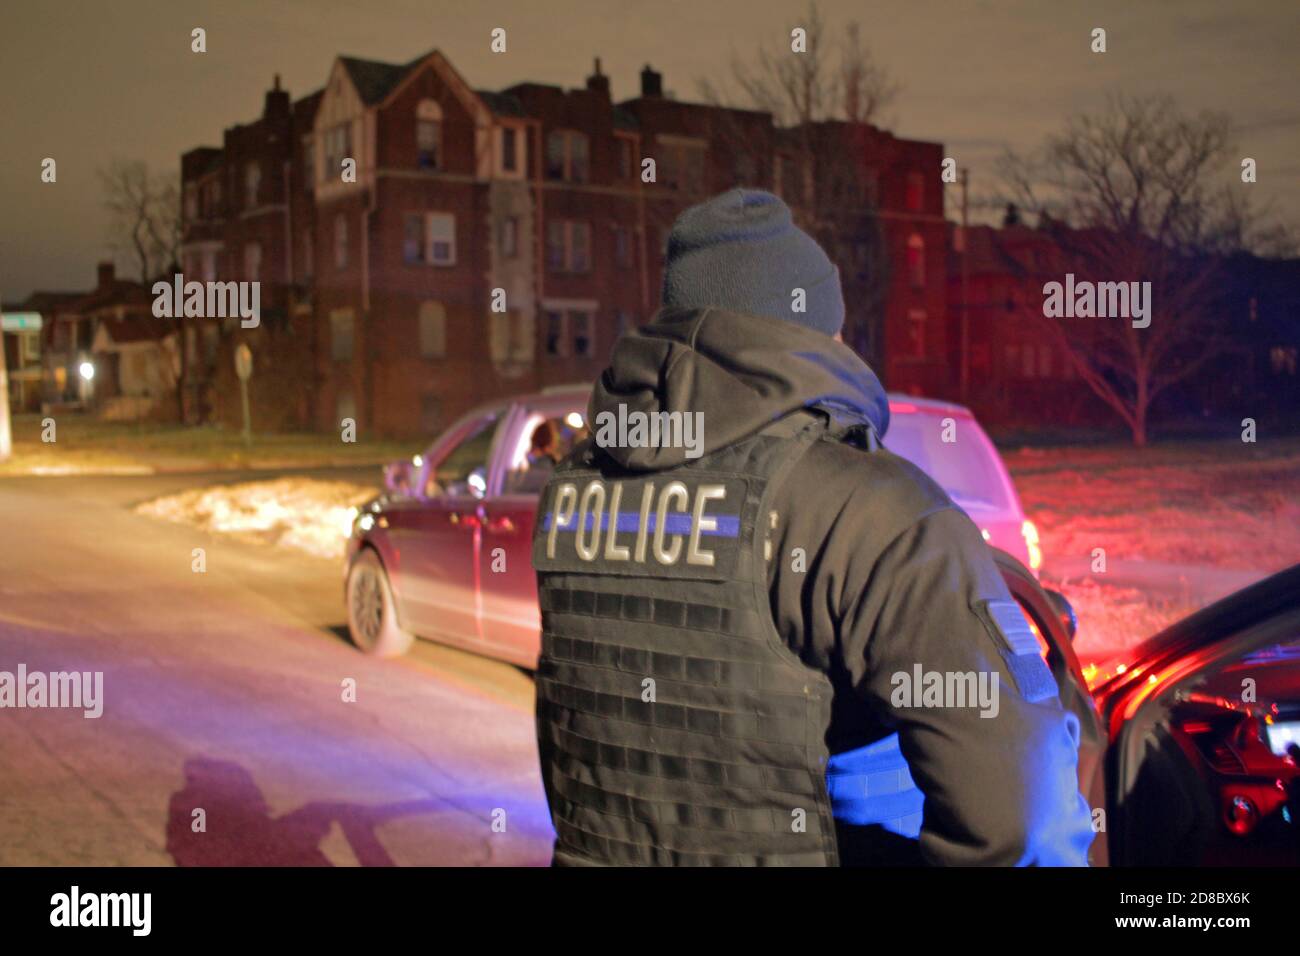 Detroit police officer checks a vehicle in the street at night, Detroit, Michigan, USA Stock Photo